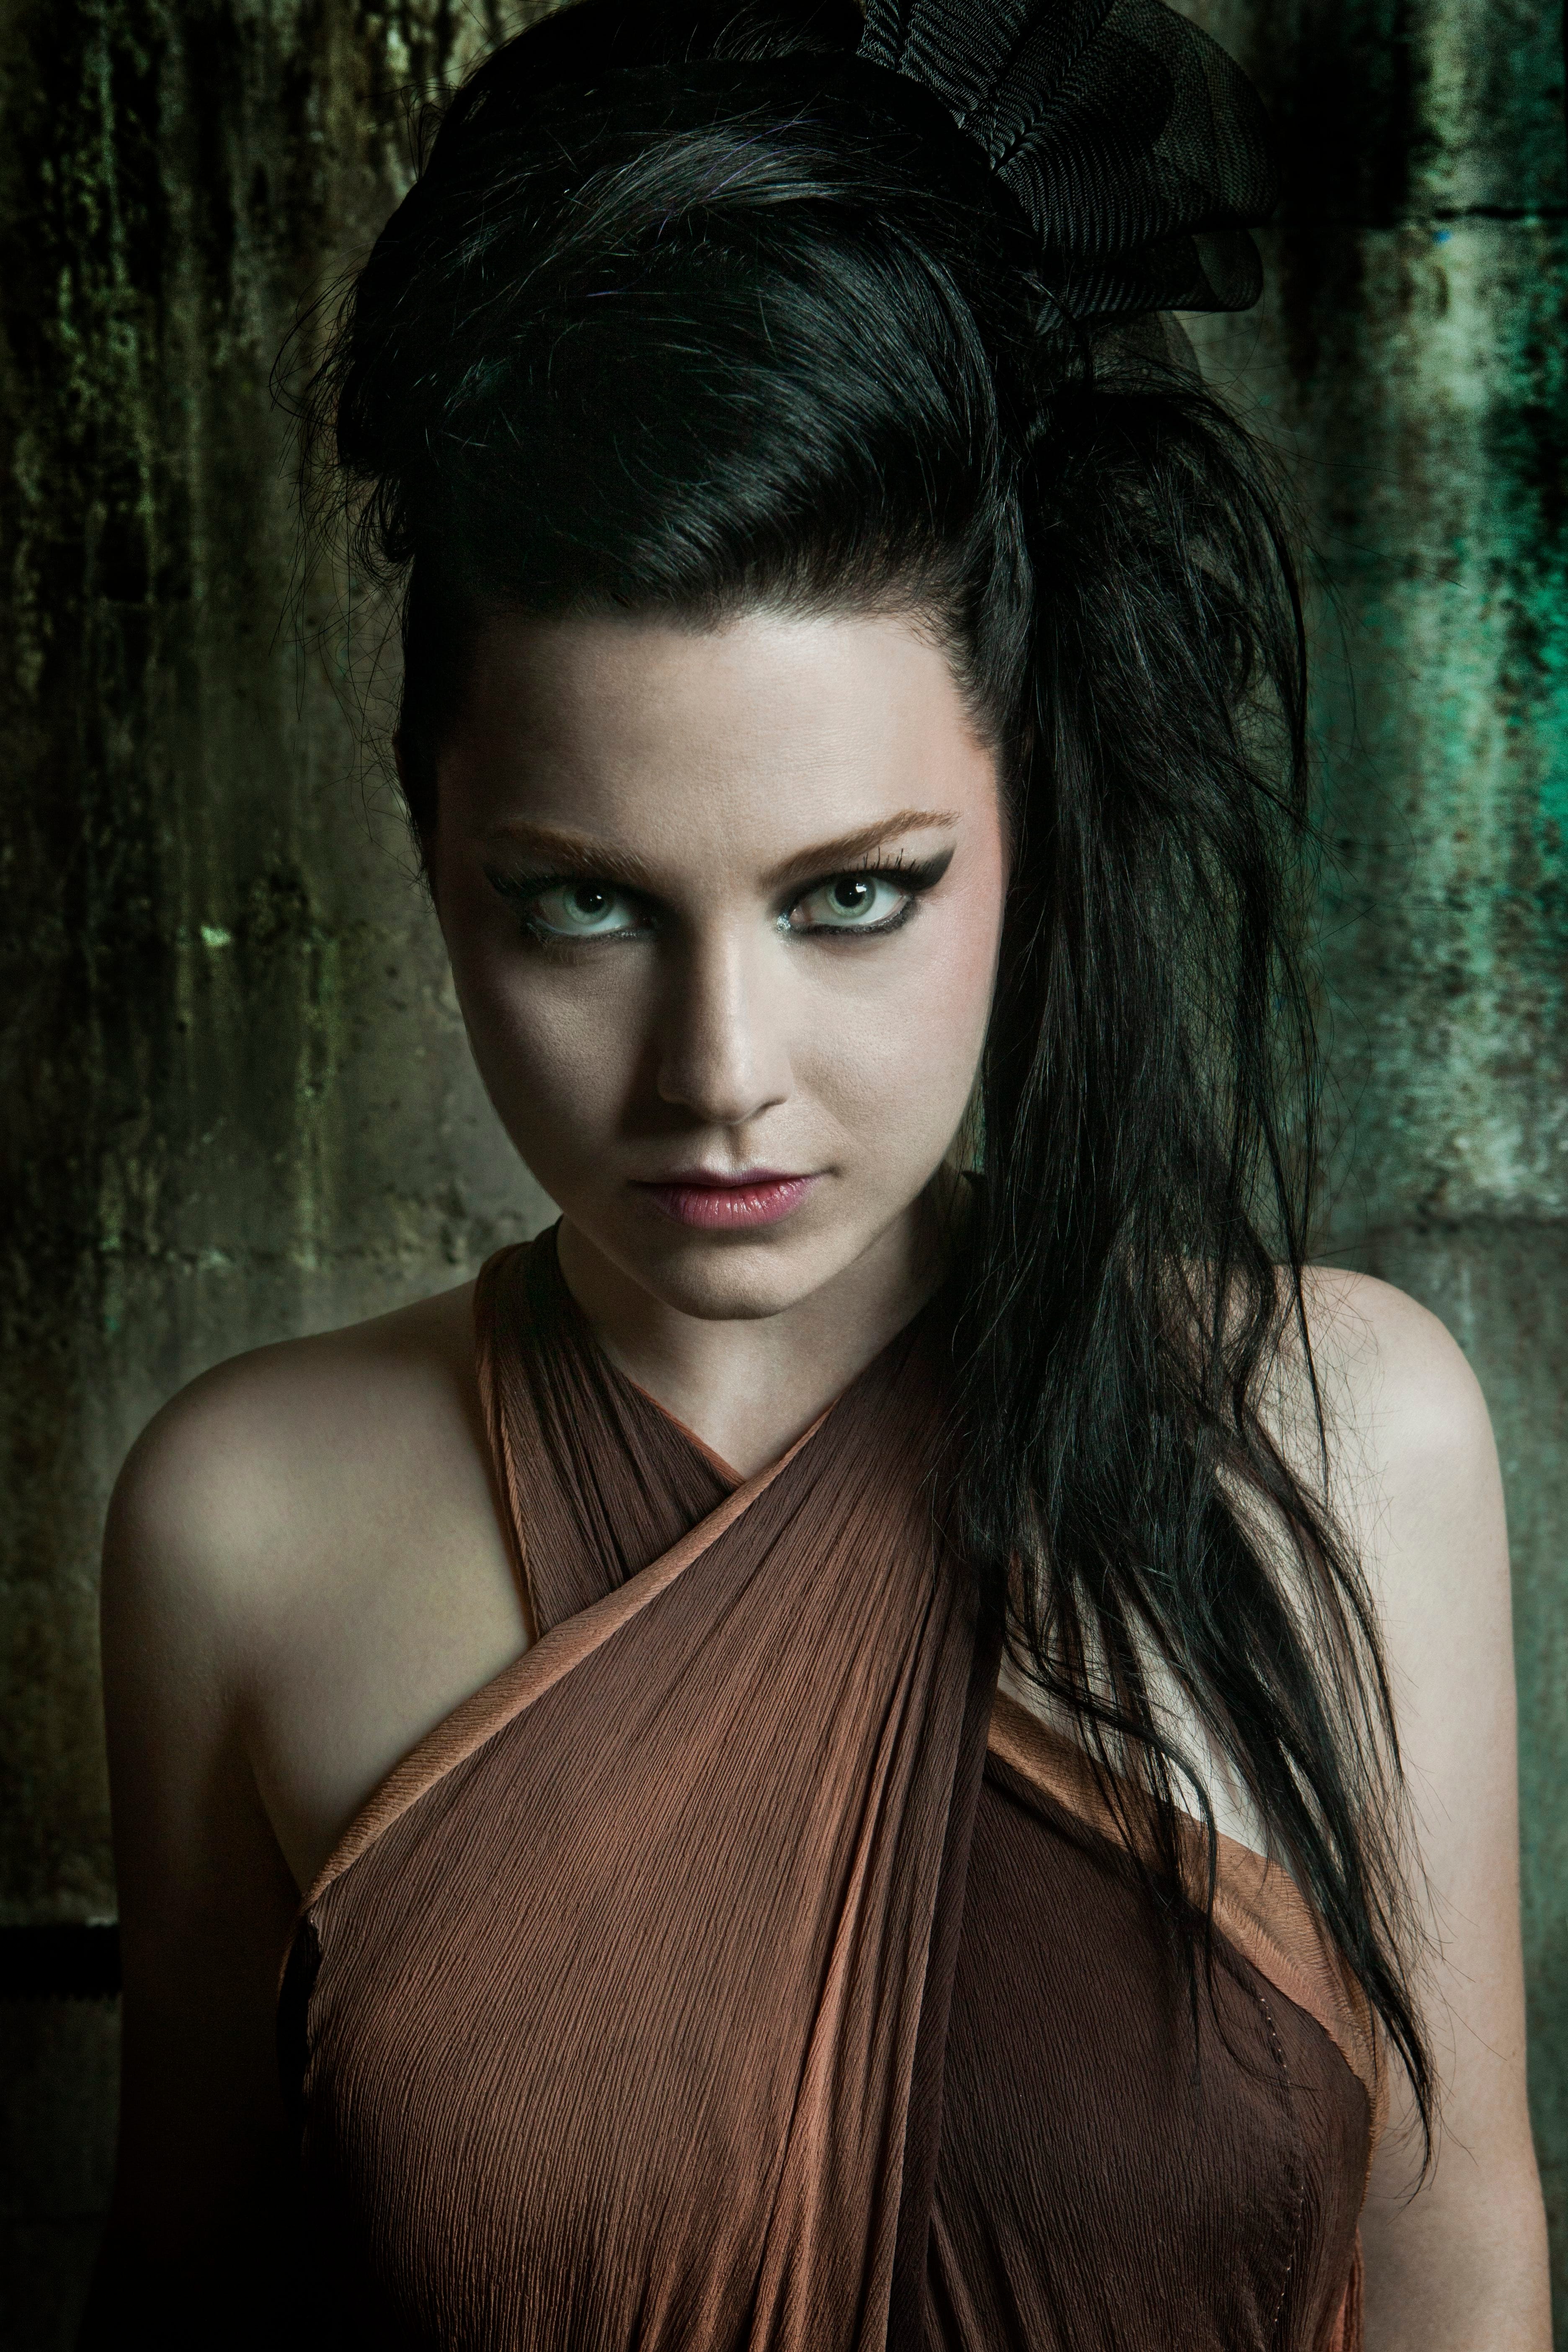 Evanescence's Amy Lee talks about the band's upheaval and continued success